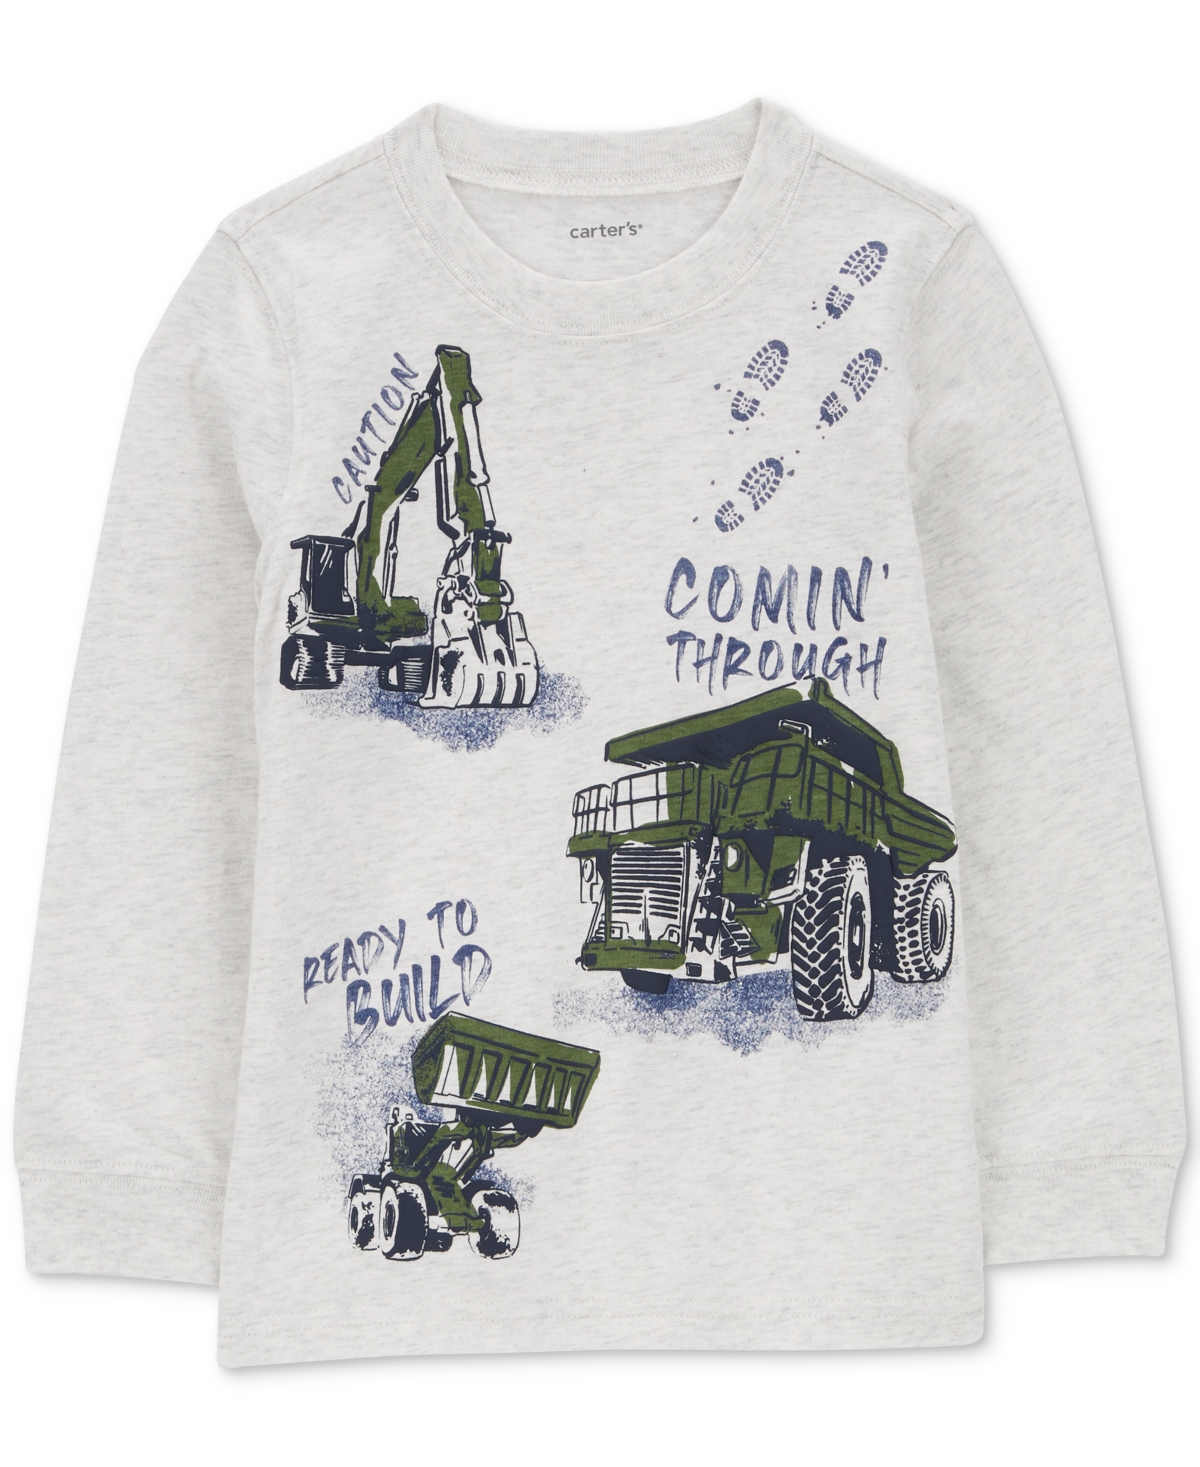 Carter's Babies' Toddler Boys Ready To Build Construction Graphic T-shirt In Cream